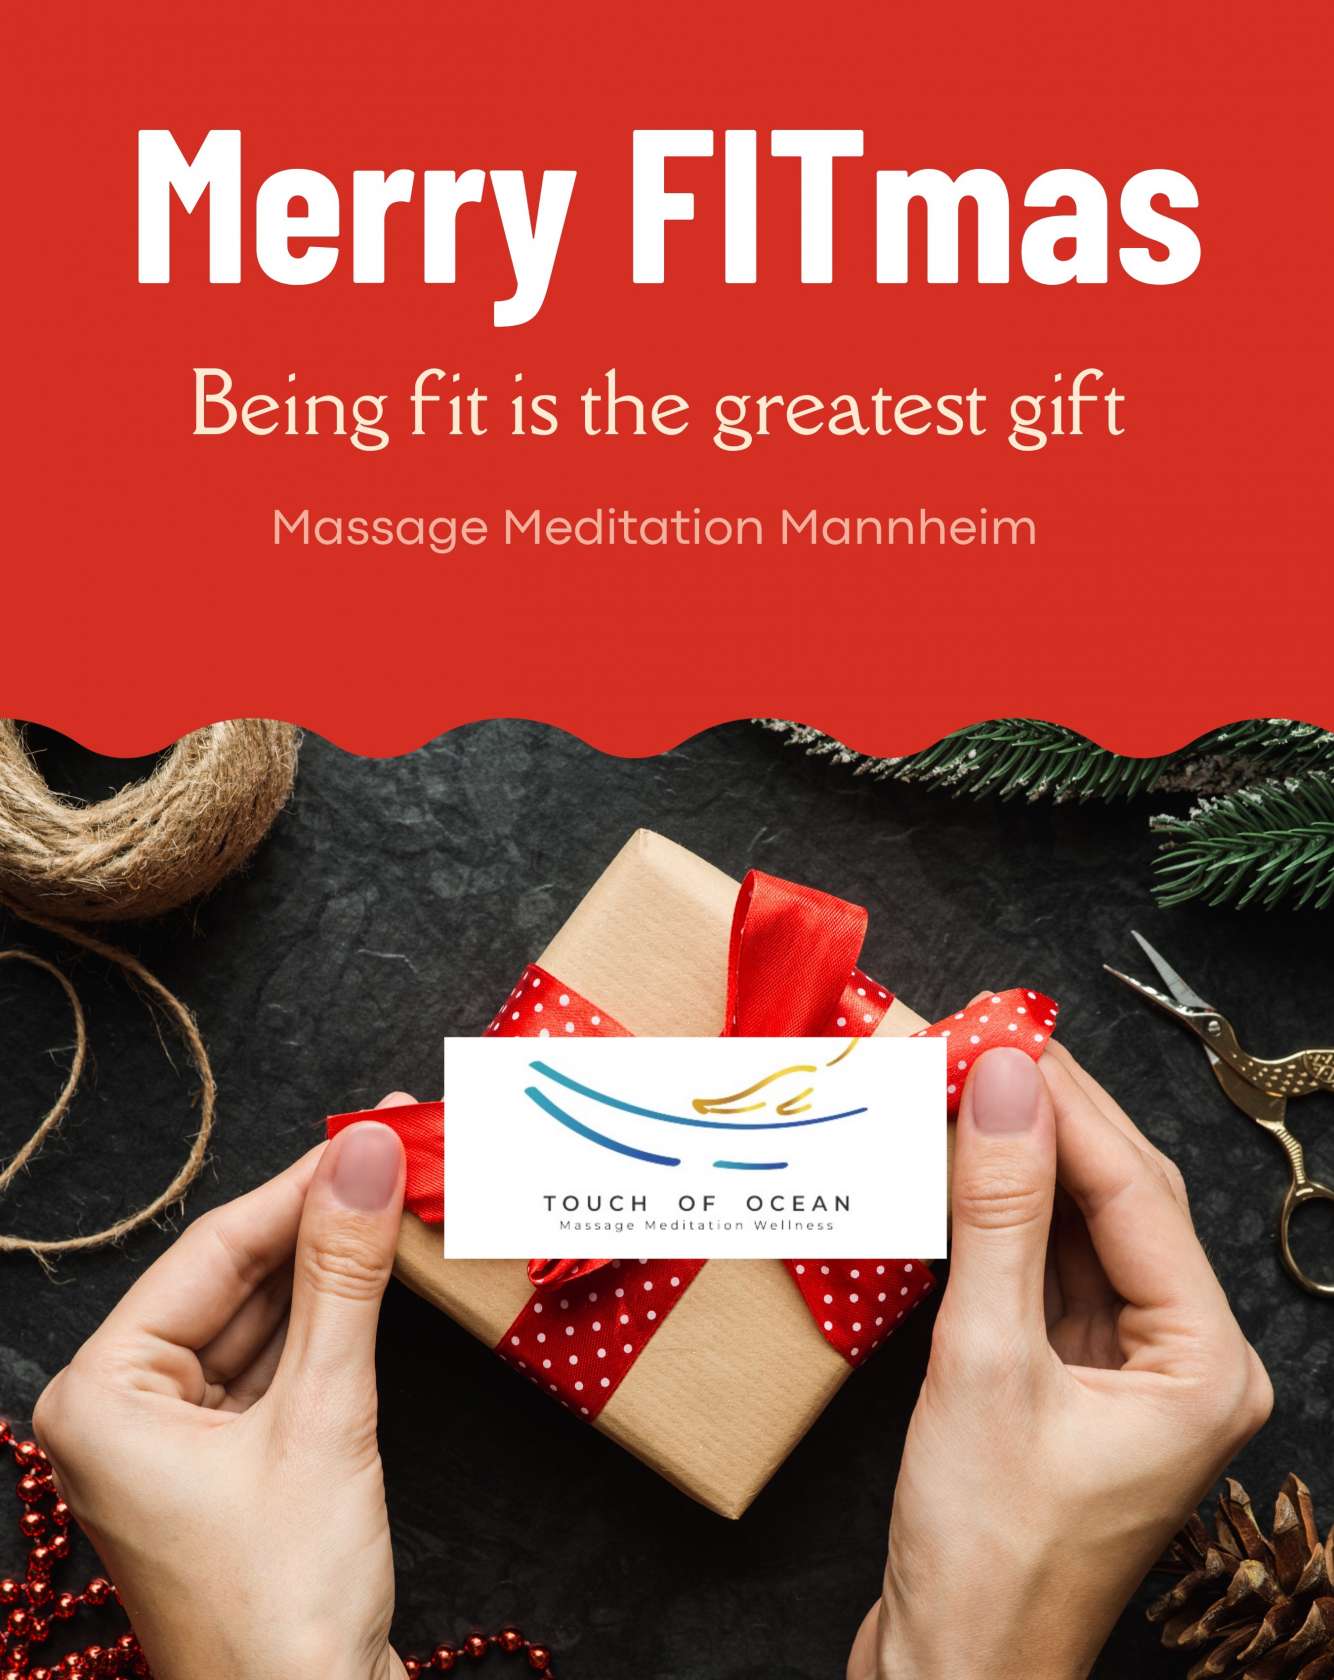 Merry FITmas Aktion